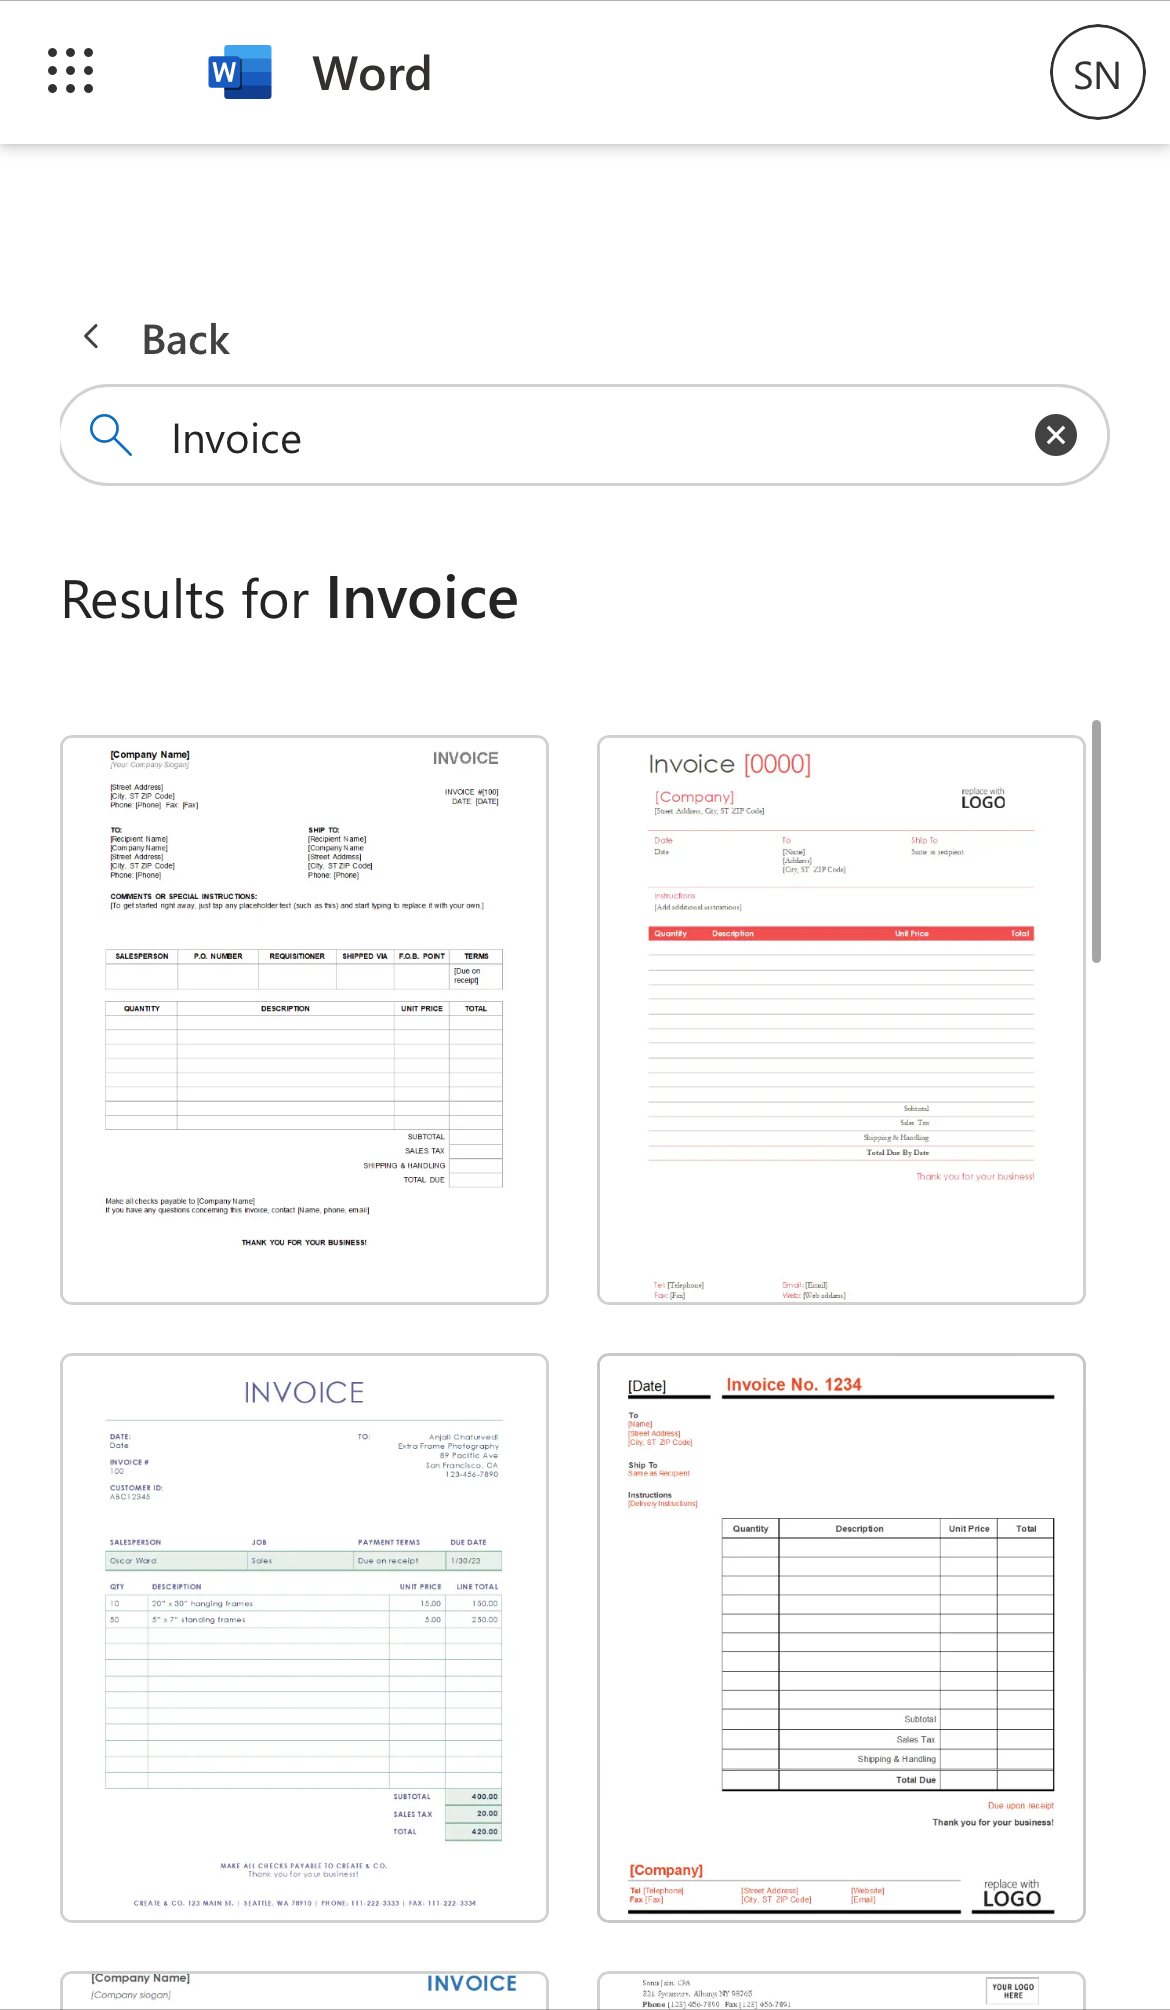 Freelance Video Editor Invoice with Word